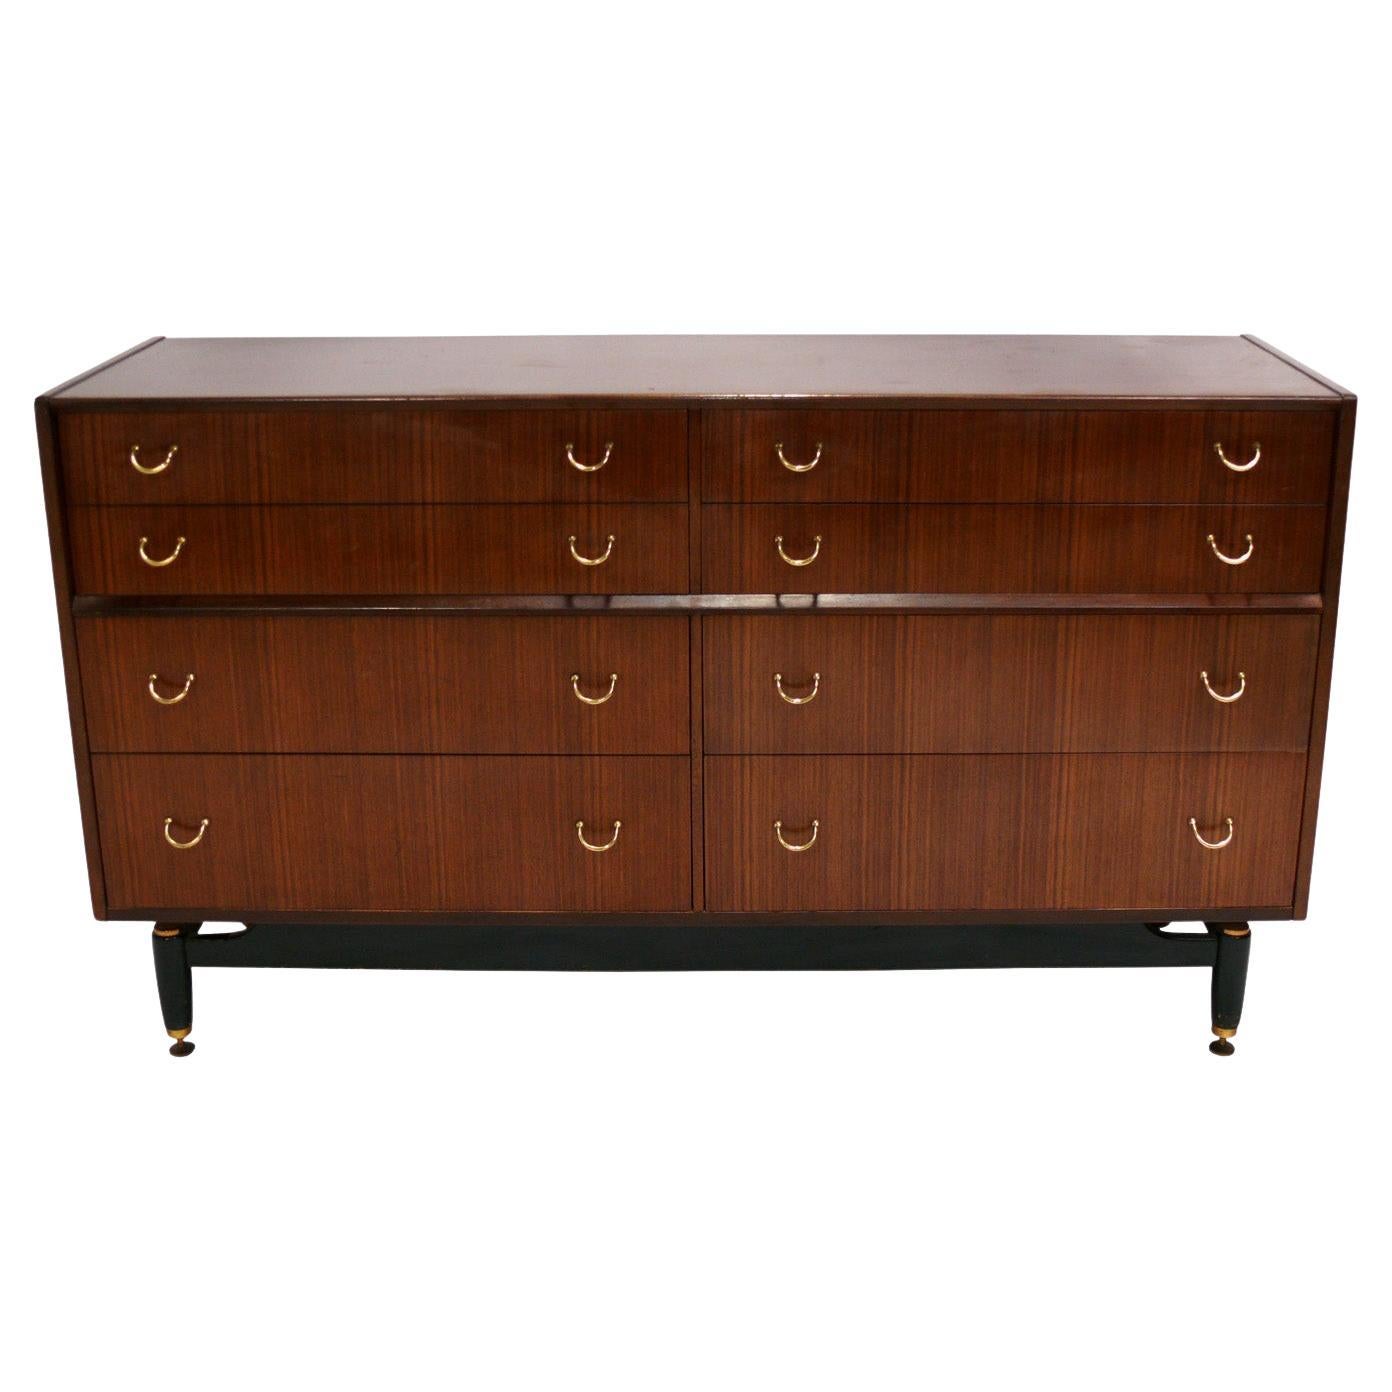 Danish Modern Style Chest or Dresser by G Plan, circa 1960s For Sale